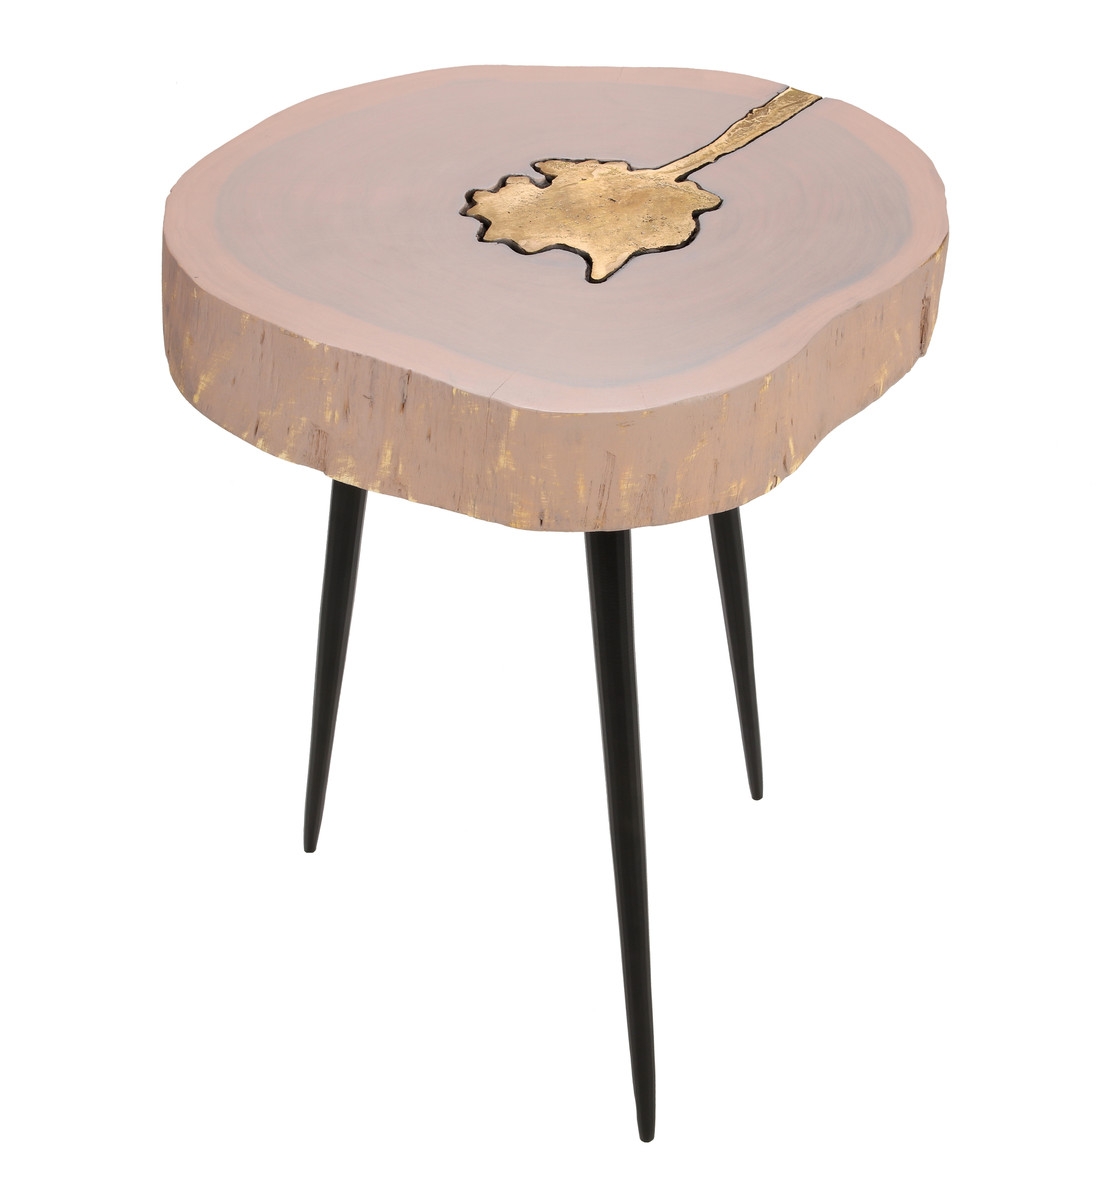 Kenzie Jane and Brass Side Table - Image 0